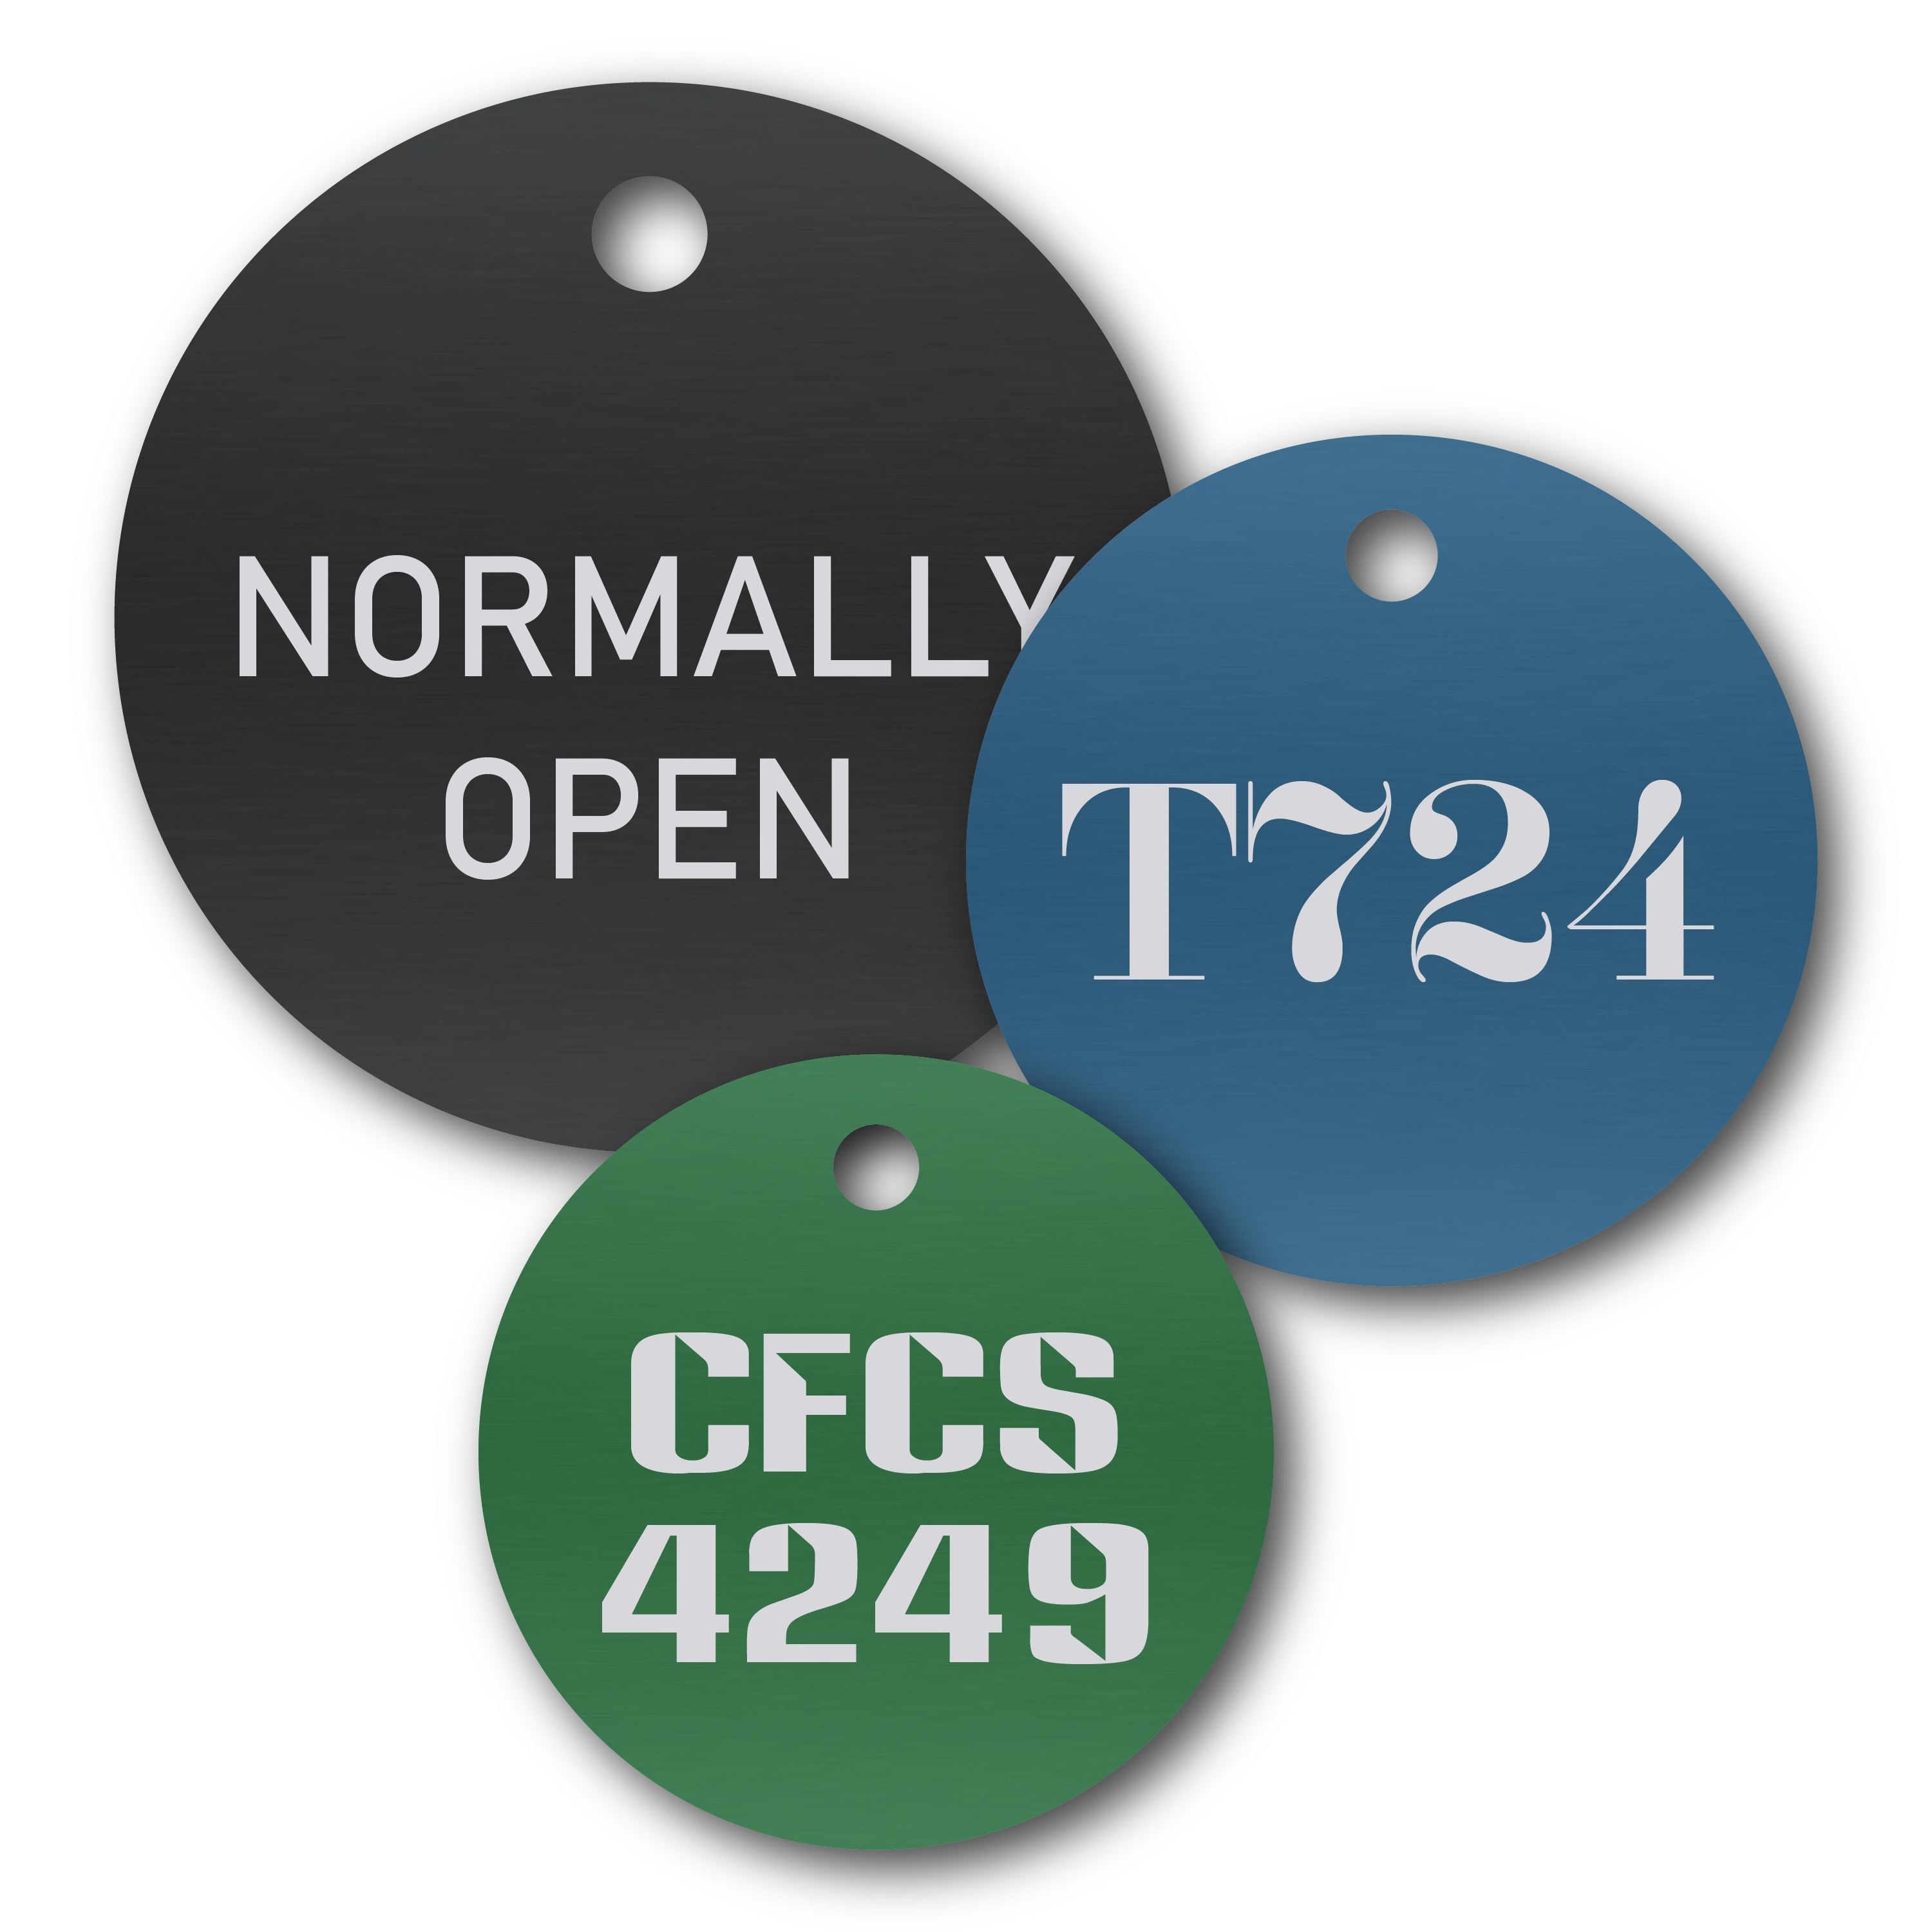 Anodized Aluminum Round Tags, 7/8" with 3/32" Hole, Laser Engraved Metal Tags Craftworks NW 